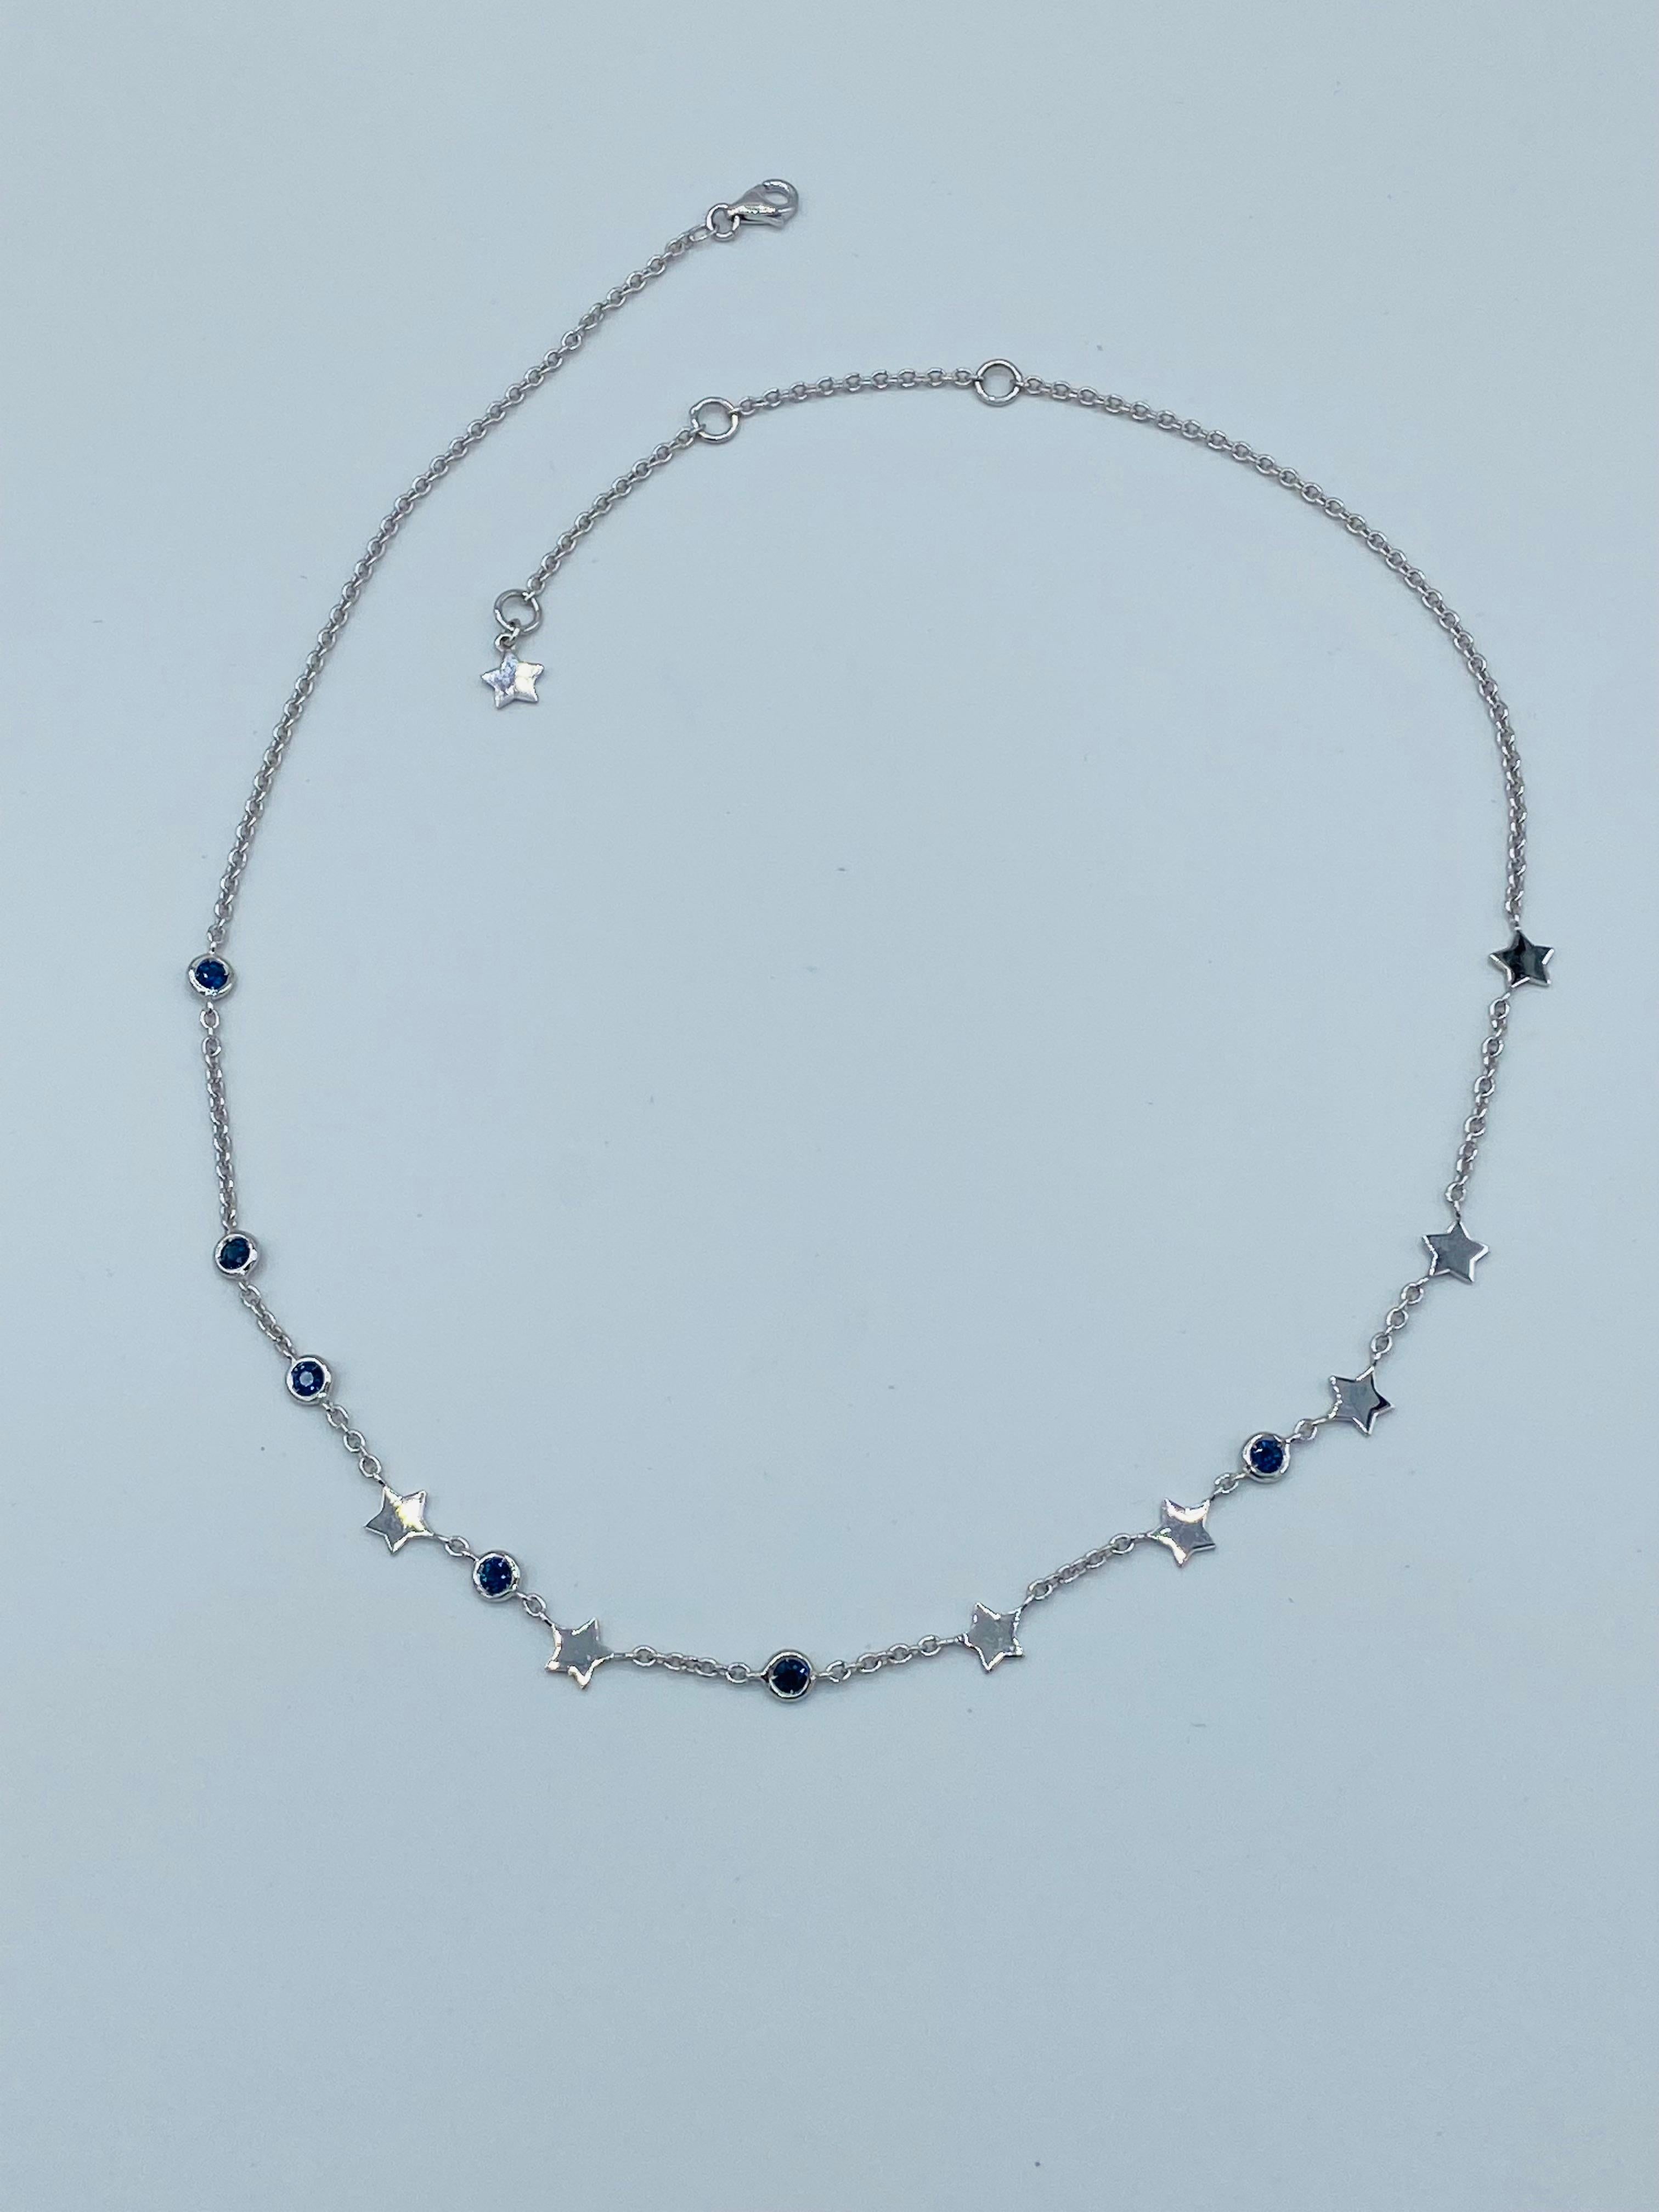 This necklace is made of white gold and has six sapphires of approximately 0.09 ct each, irregularly alternated with white gold stars.
It is possible to wear it in three different sizes because it has three rings each in 28.5, 41, 44.5 cm. A